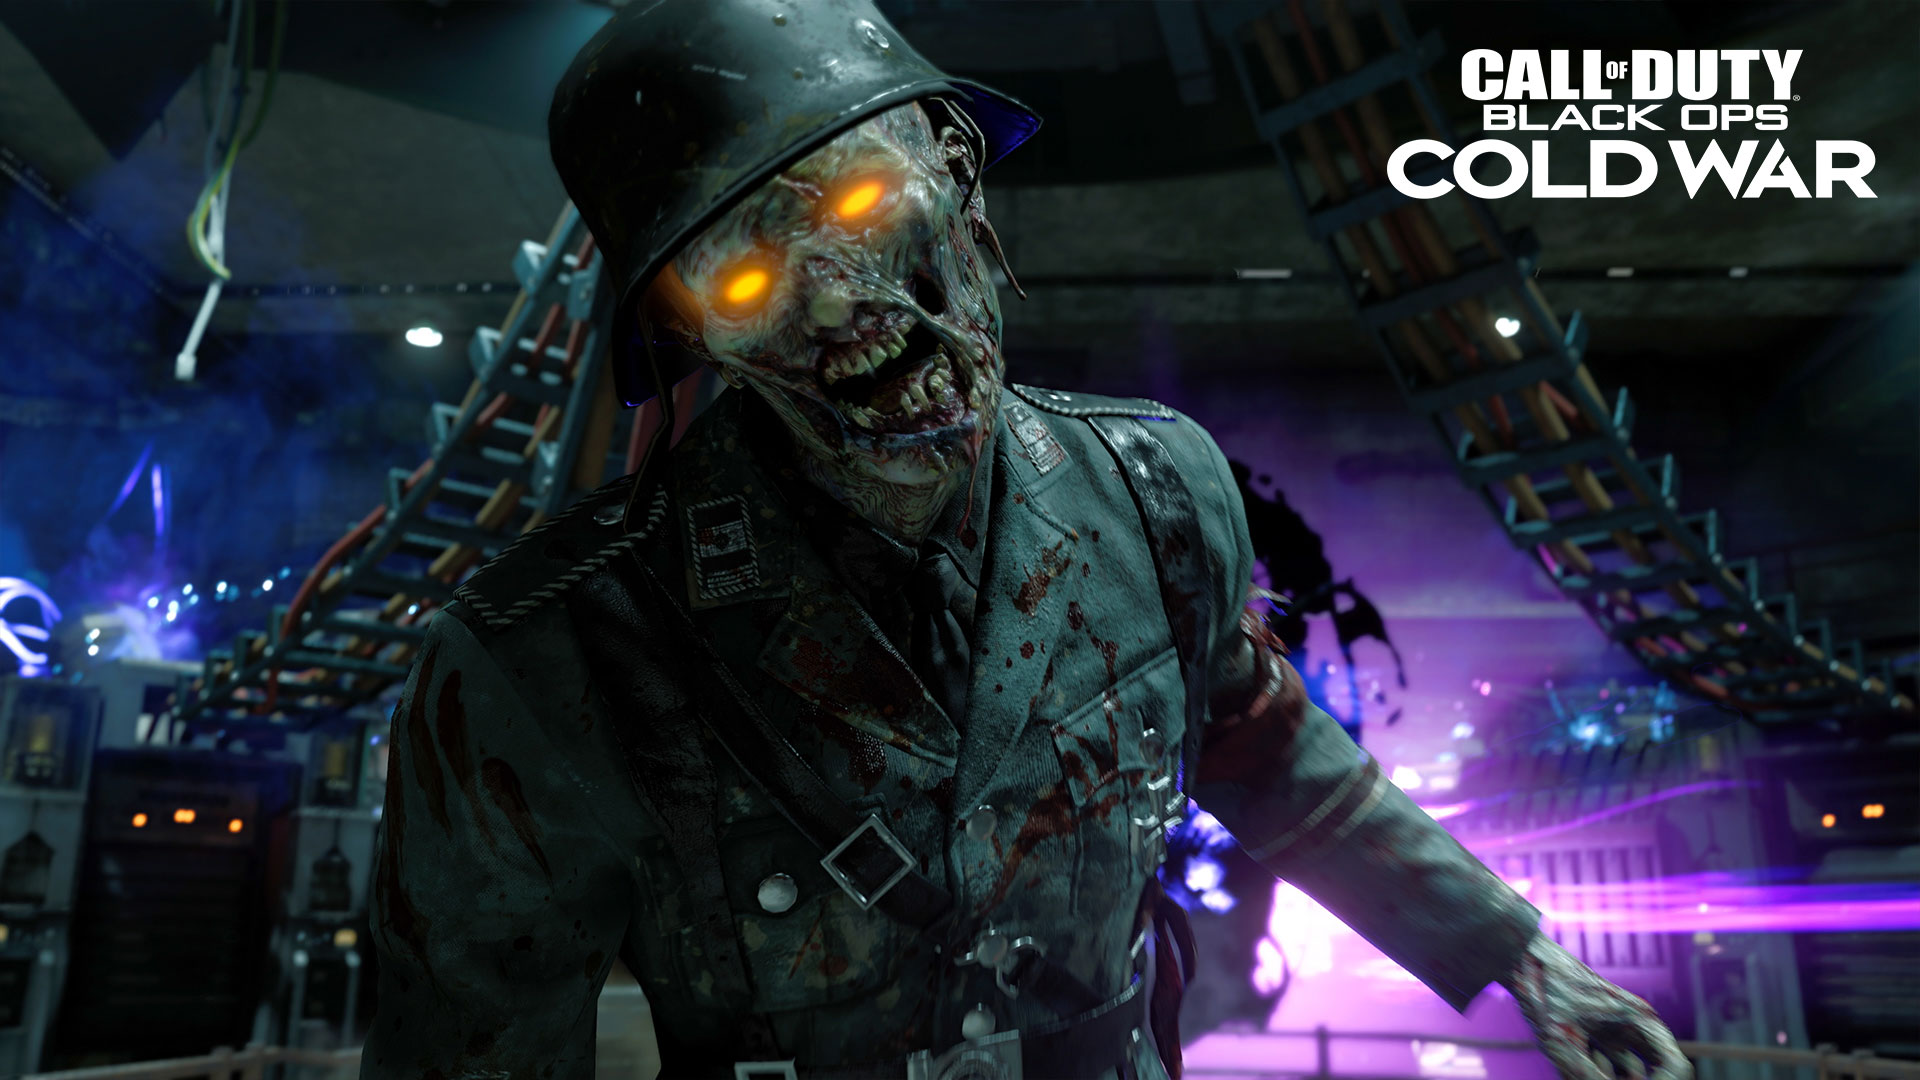 Call of Duty Black Ops Cold War - Zombies